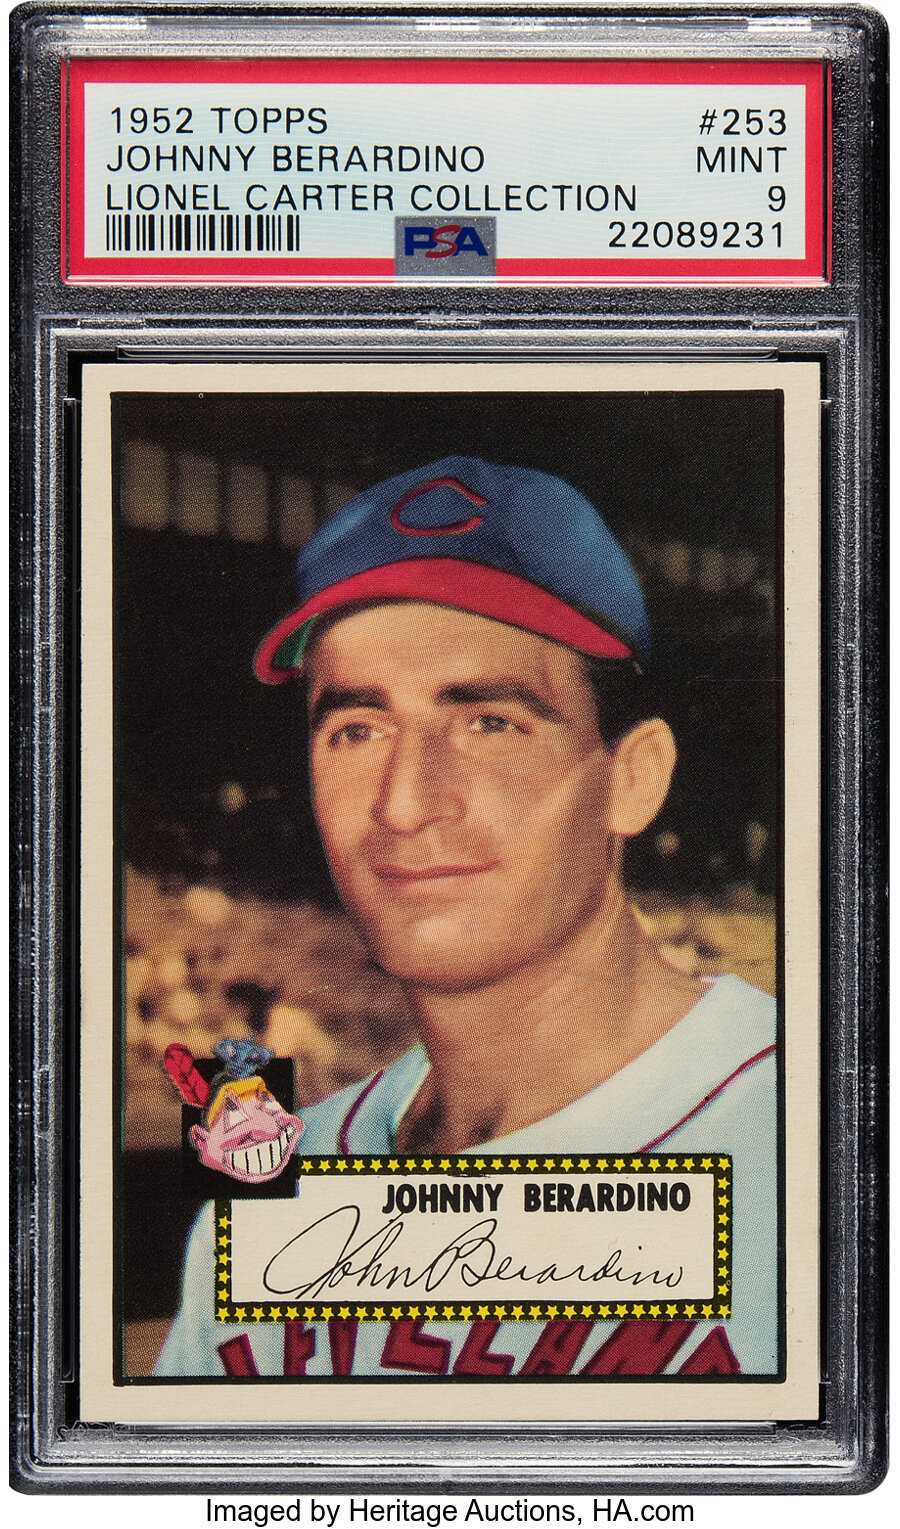 1952 Topps Johnny Berardino #253 PSA Mint 9 - Pop Five, None Superior! From the Lionel Carter Collection